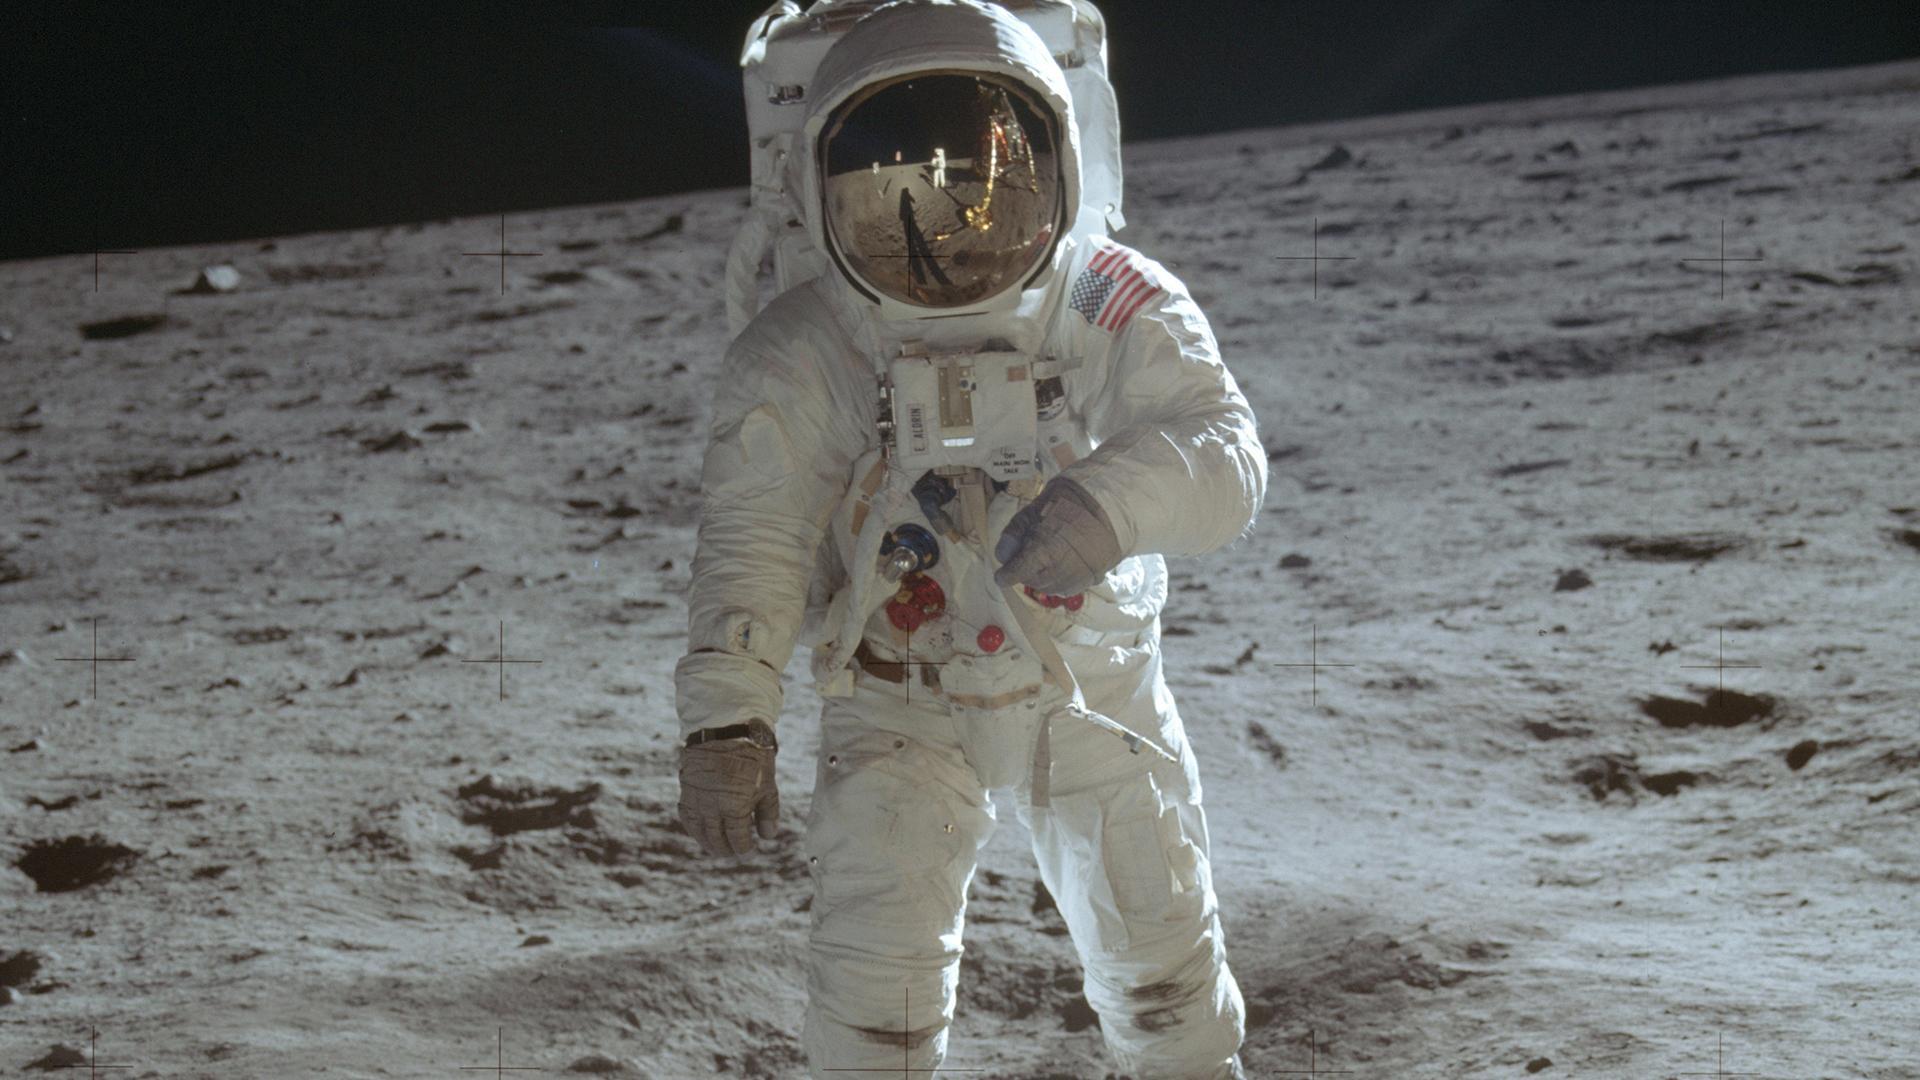 Nation Marks 50 Years After Apollo 11's 'Giant Leap' on Moon